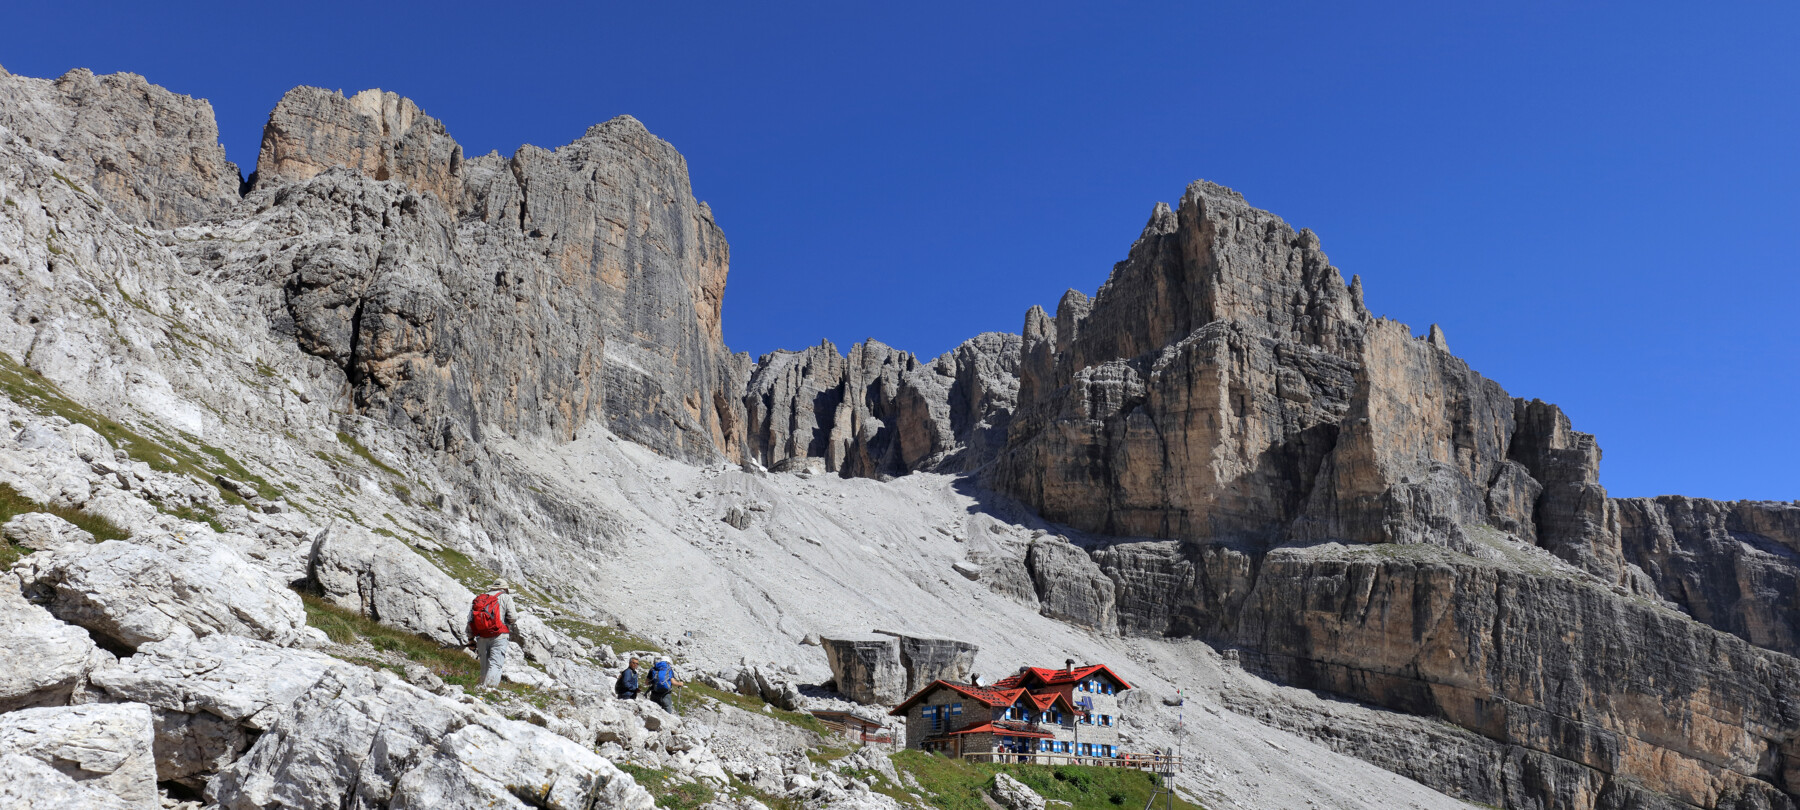 Via delle Normali: the geology of the Dolomites